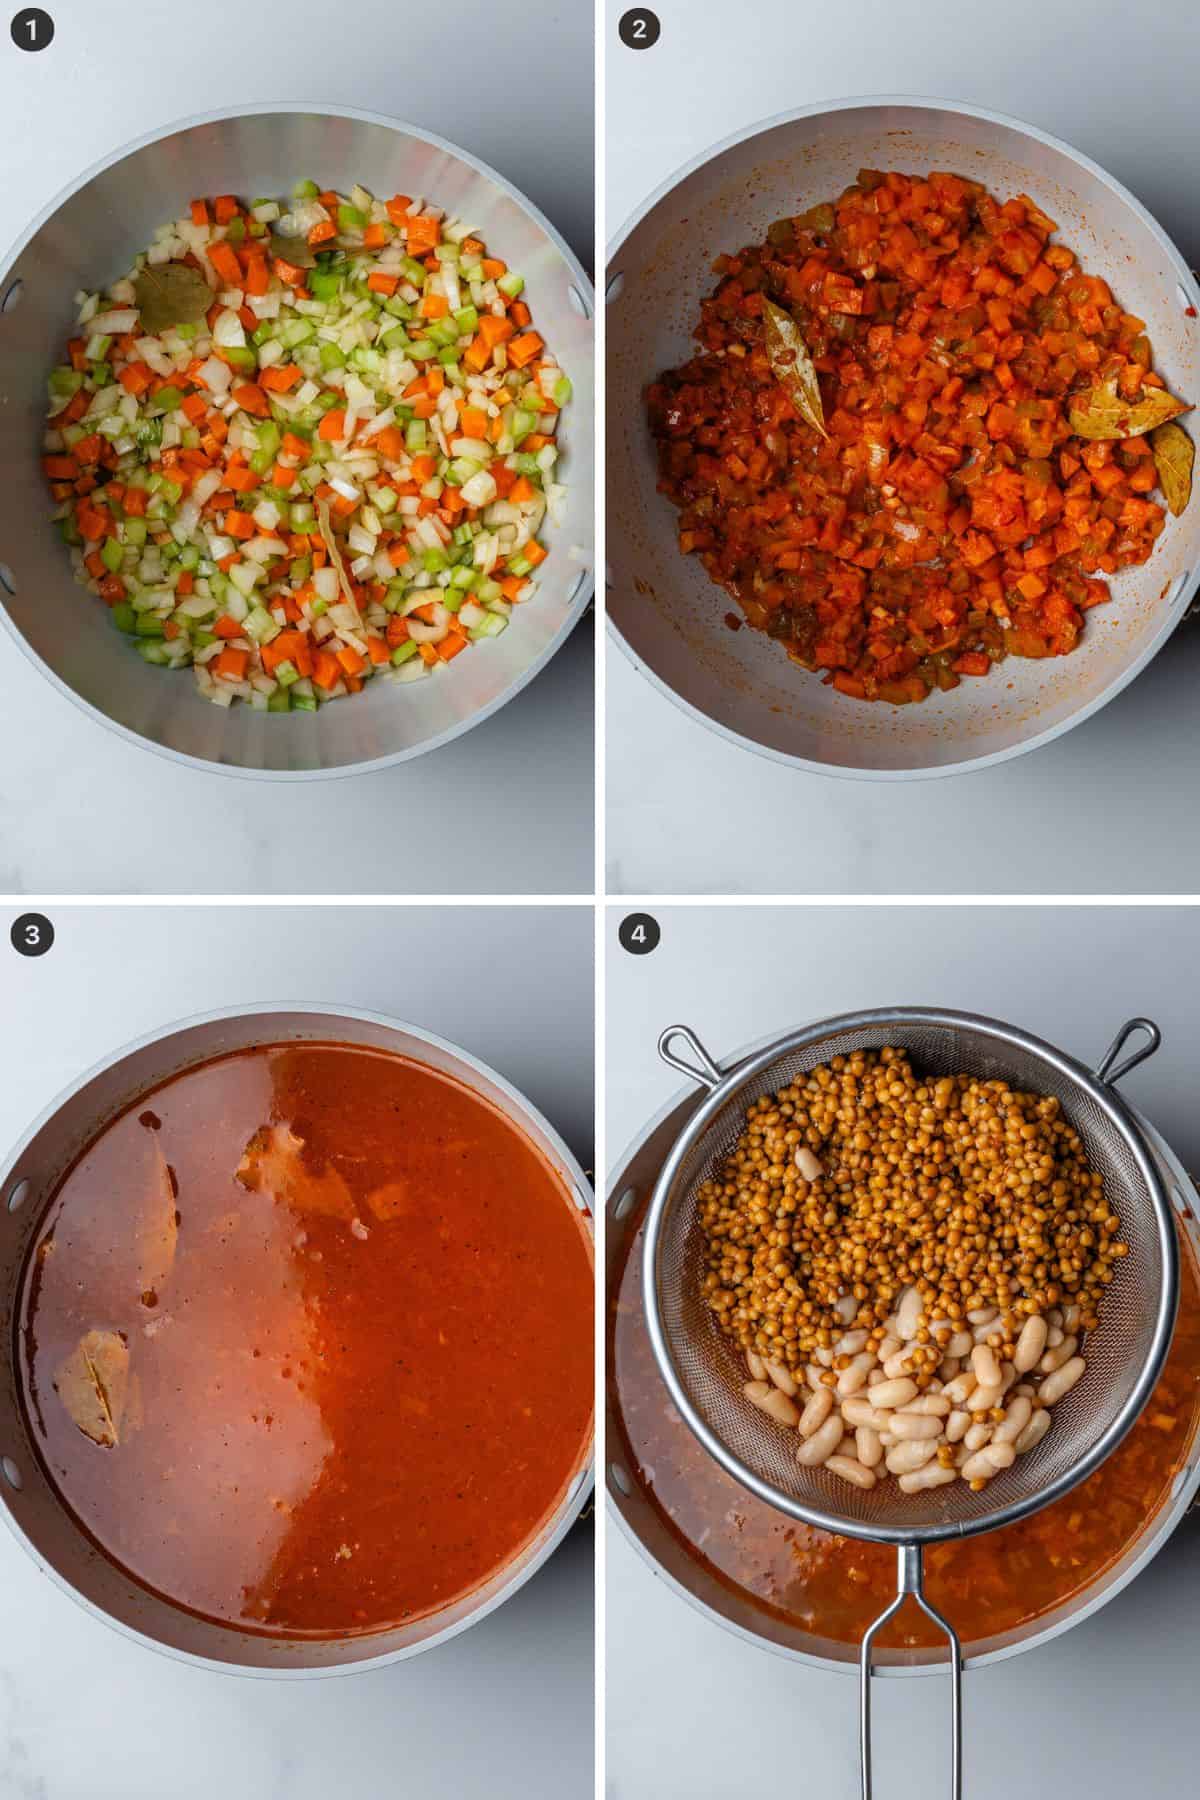 Steps on how to make minestrone soup